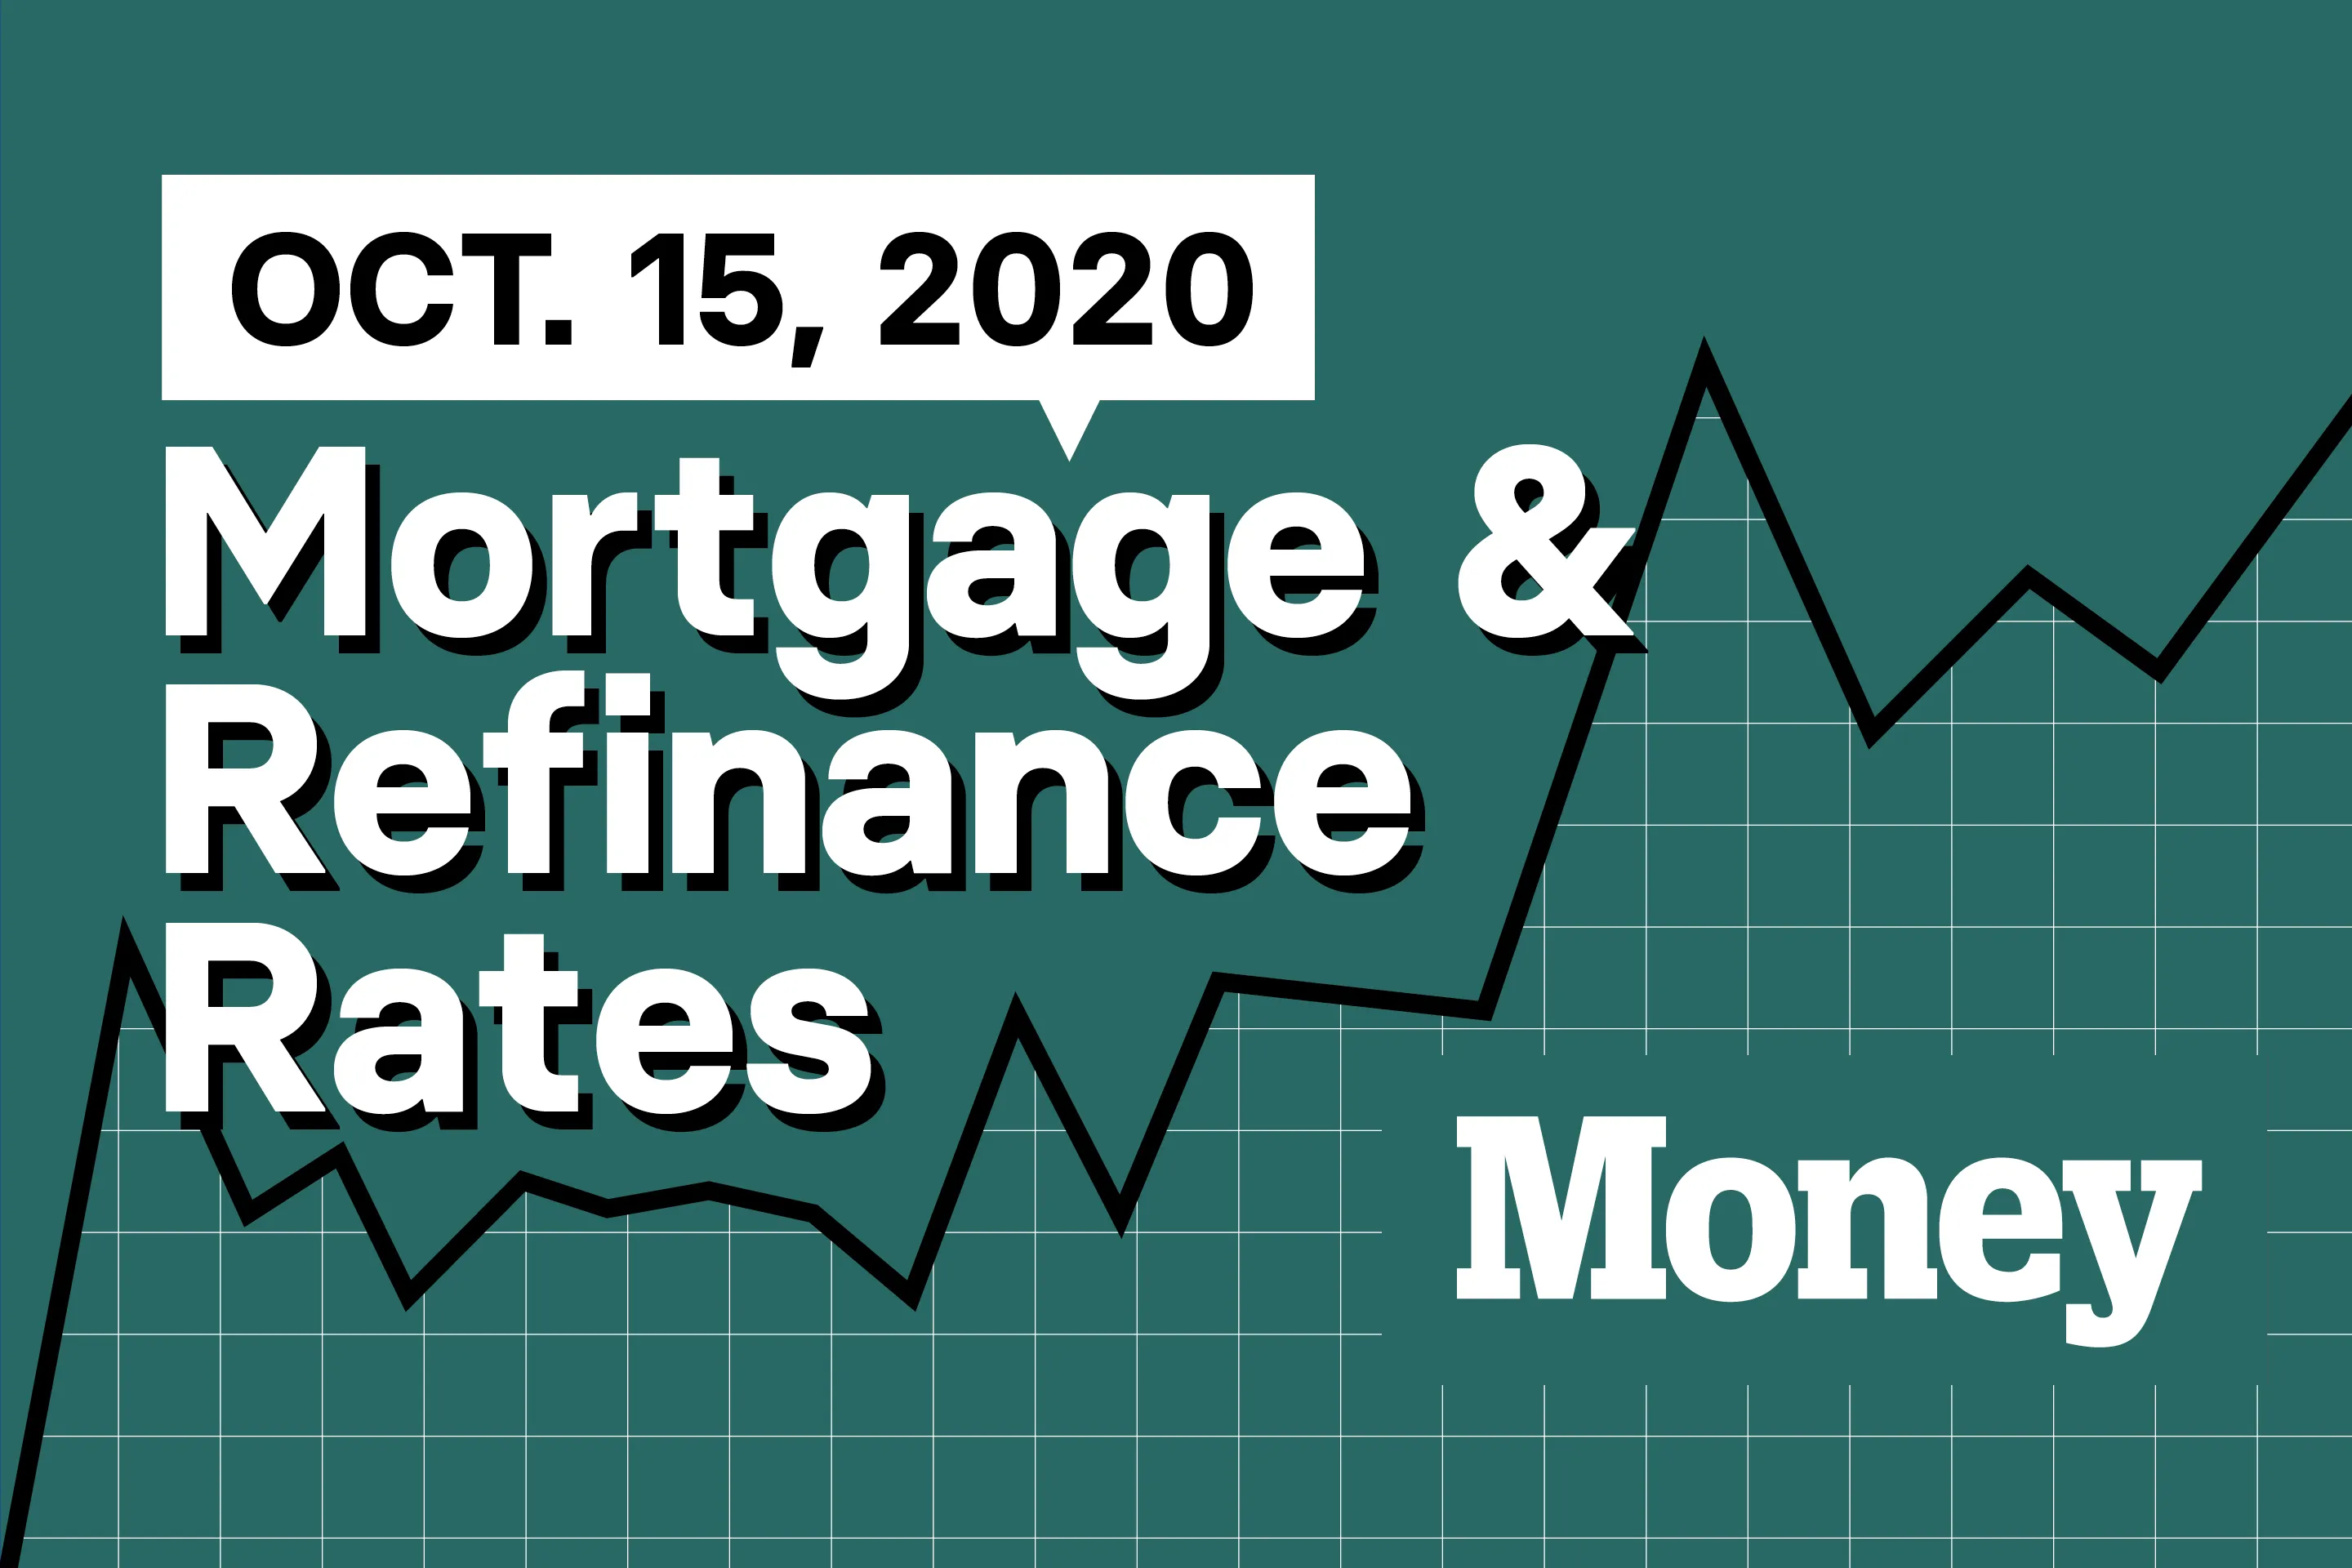 Here Are Today's Best Mortgage & Refinance Rates for October 15, 2020